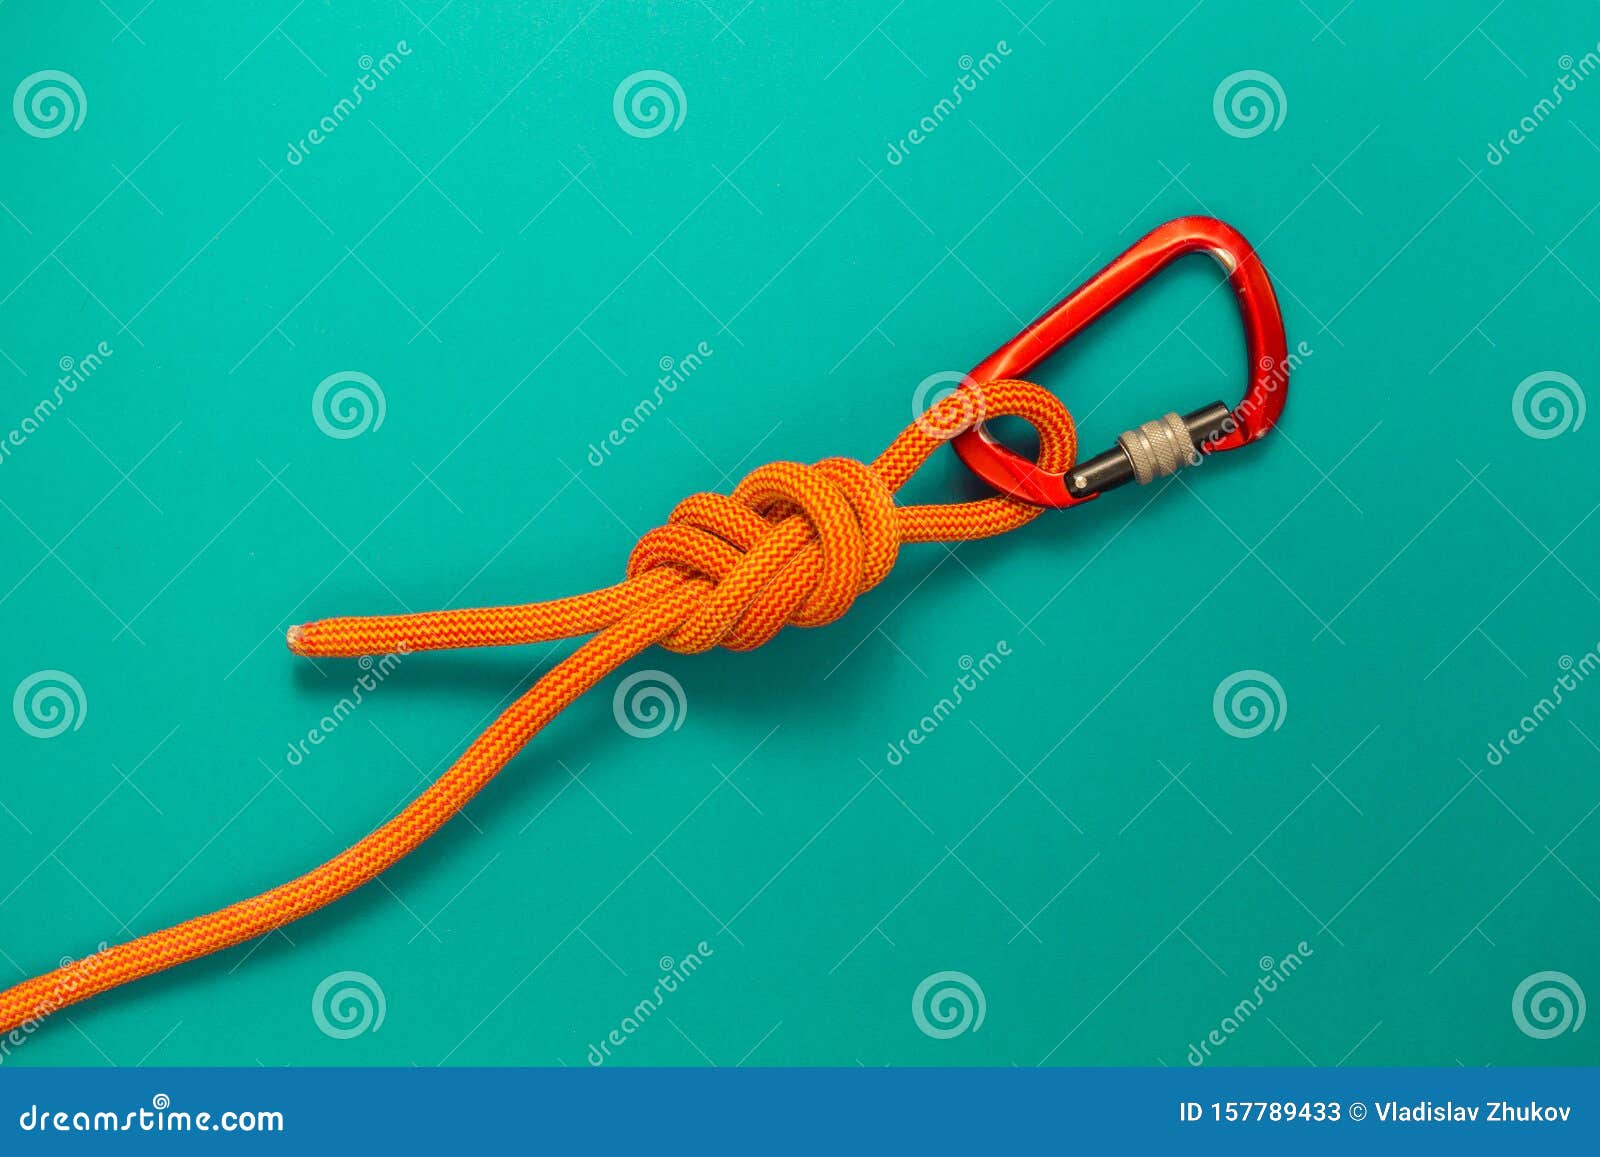 Carabiner and Knot from a Climbing Rope Stock Image - Image of